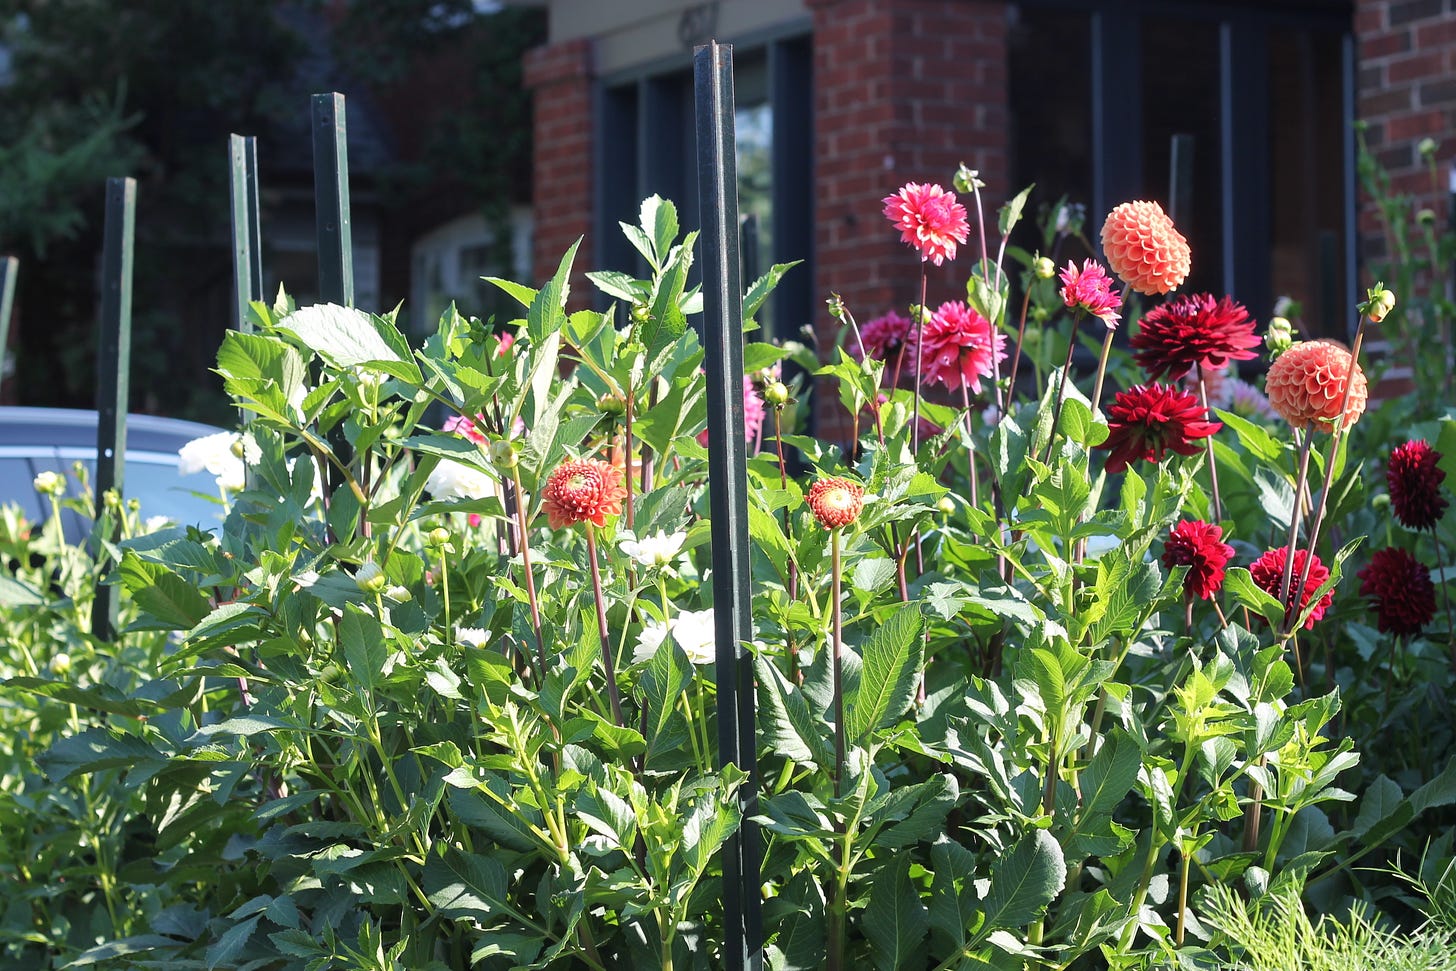 A patch of dahlias planted closely together in shades of red, pink, and orange. They are supported by black T-bar posts. A person's house is visible in the background.